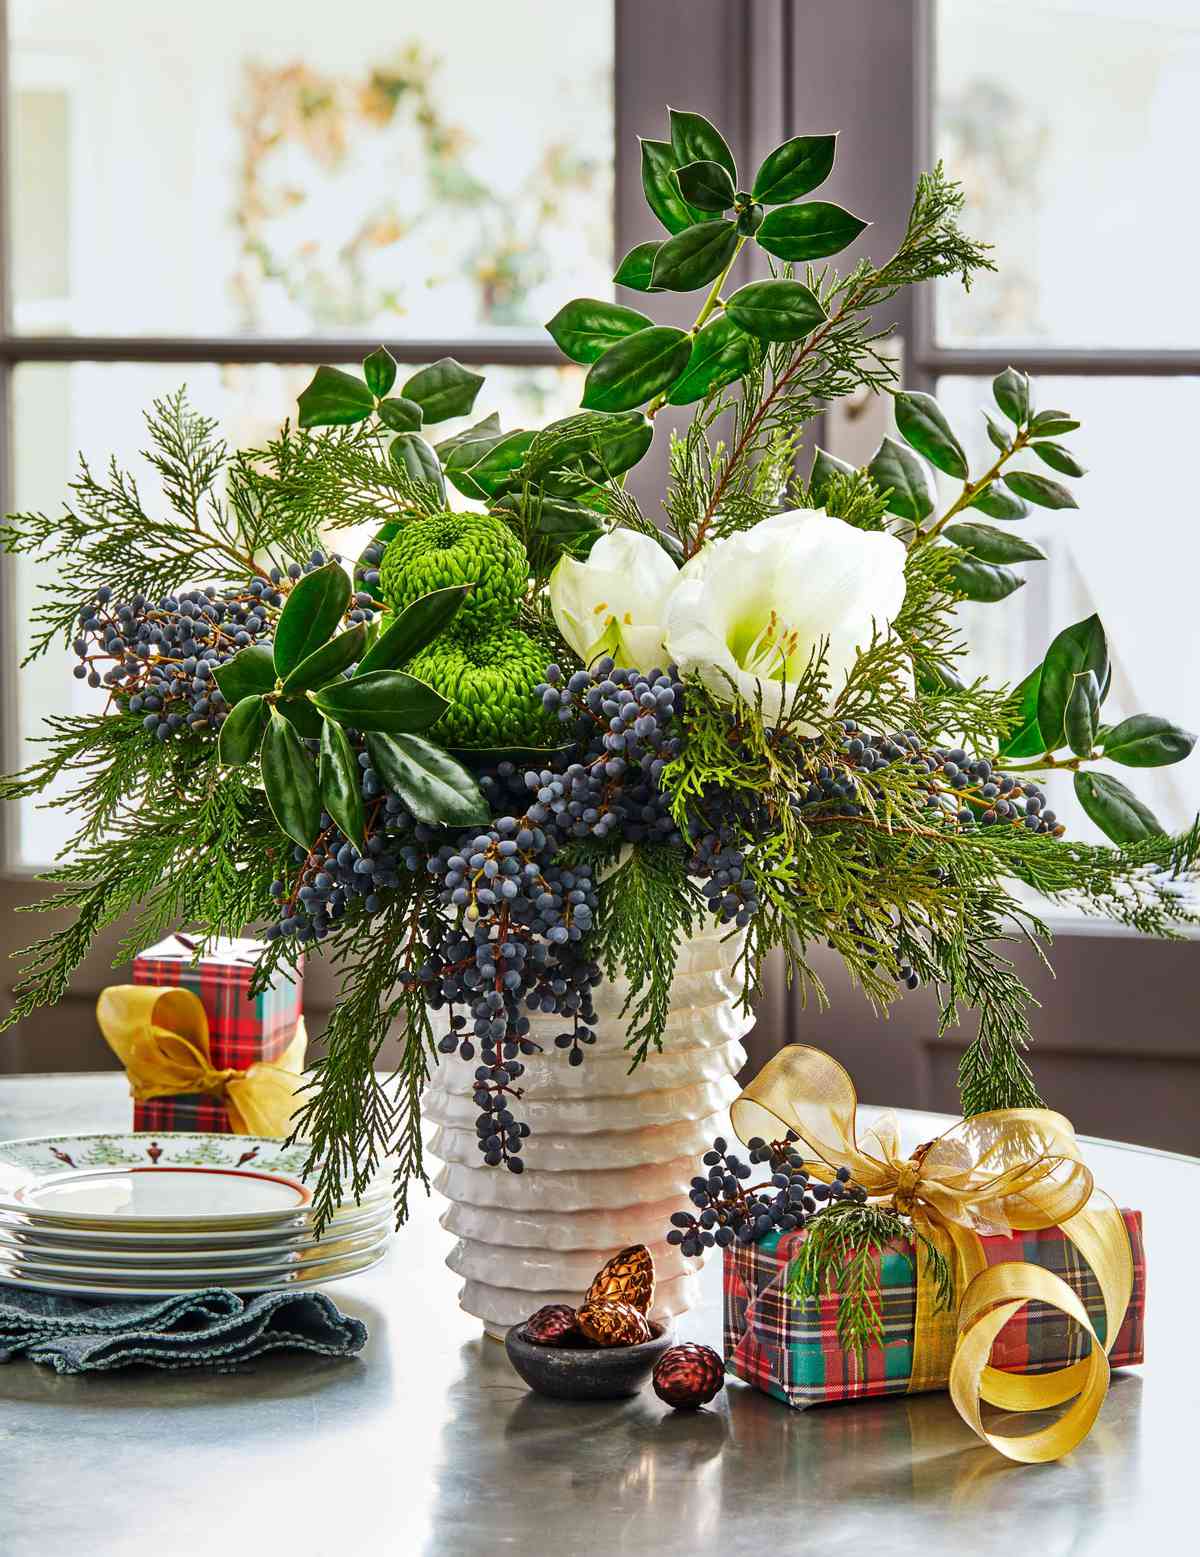 Holly, Cedar, and Privet Berry Arrangement with White Amaryllis and Green Mum flowers